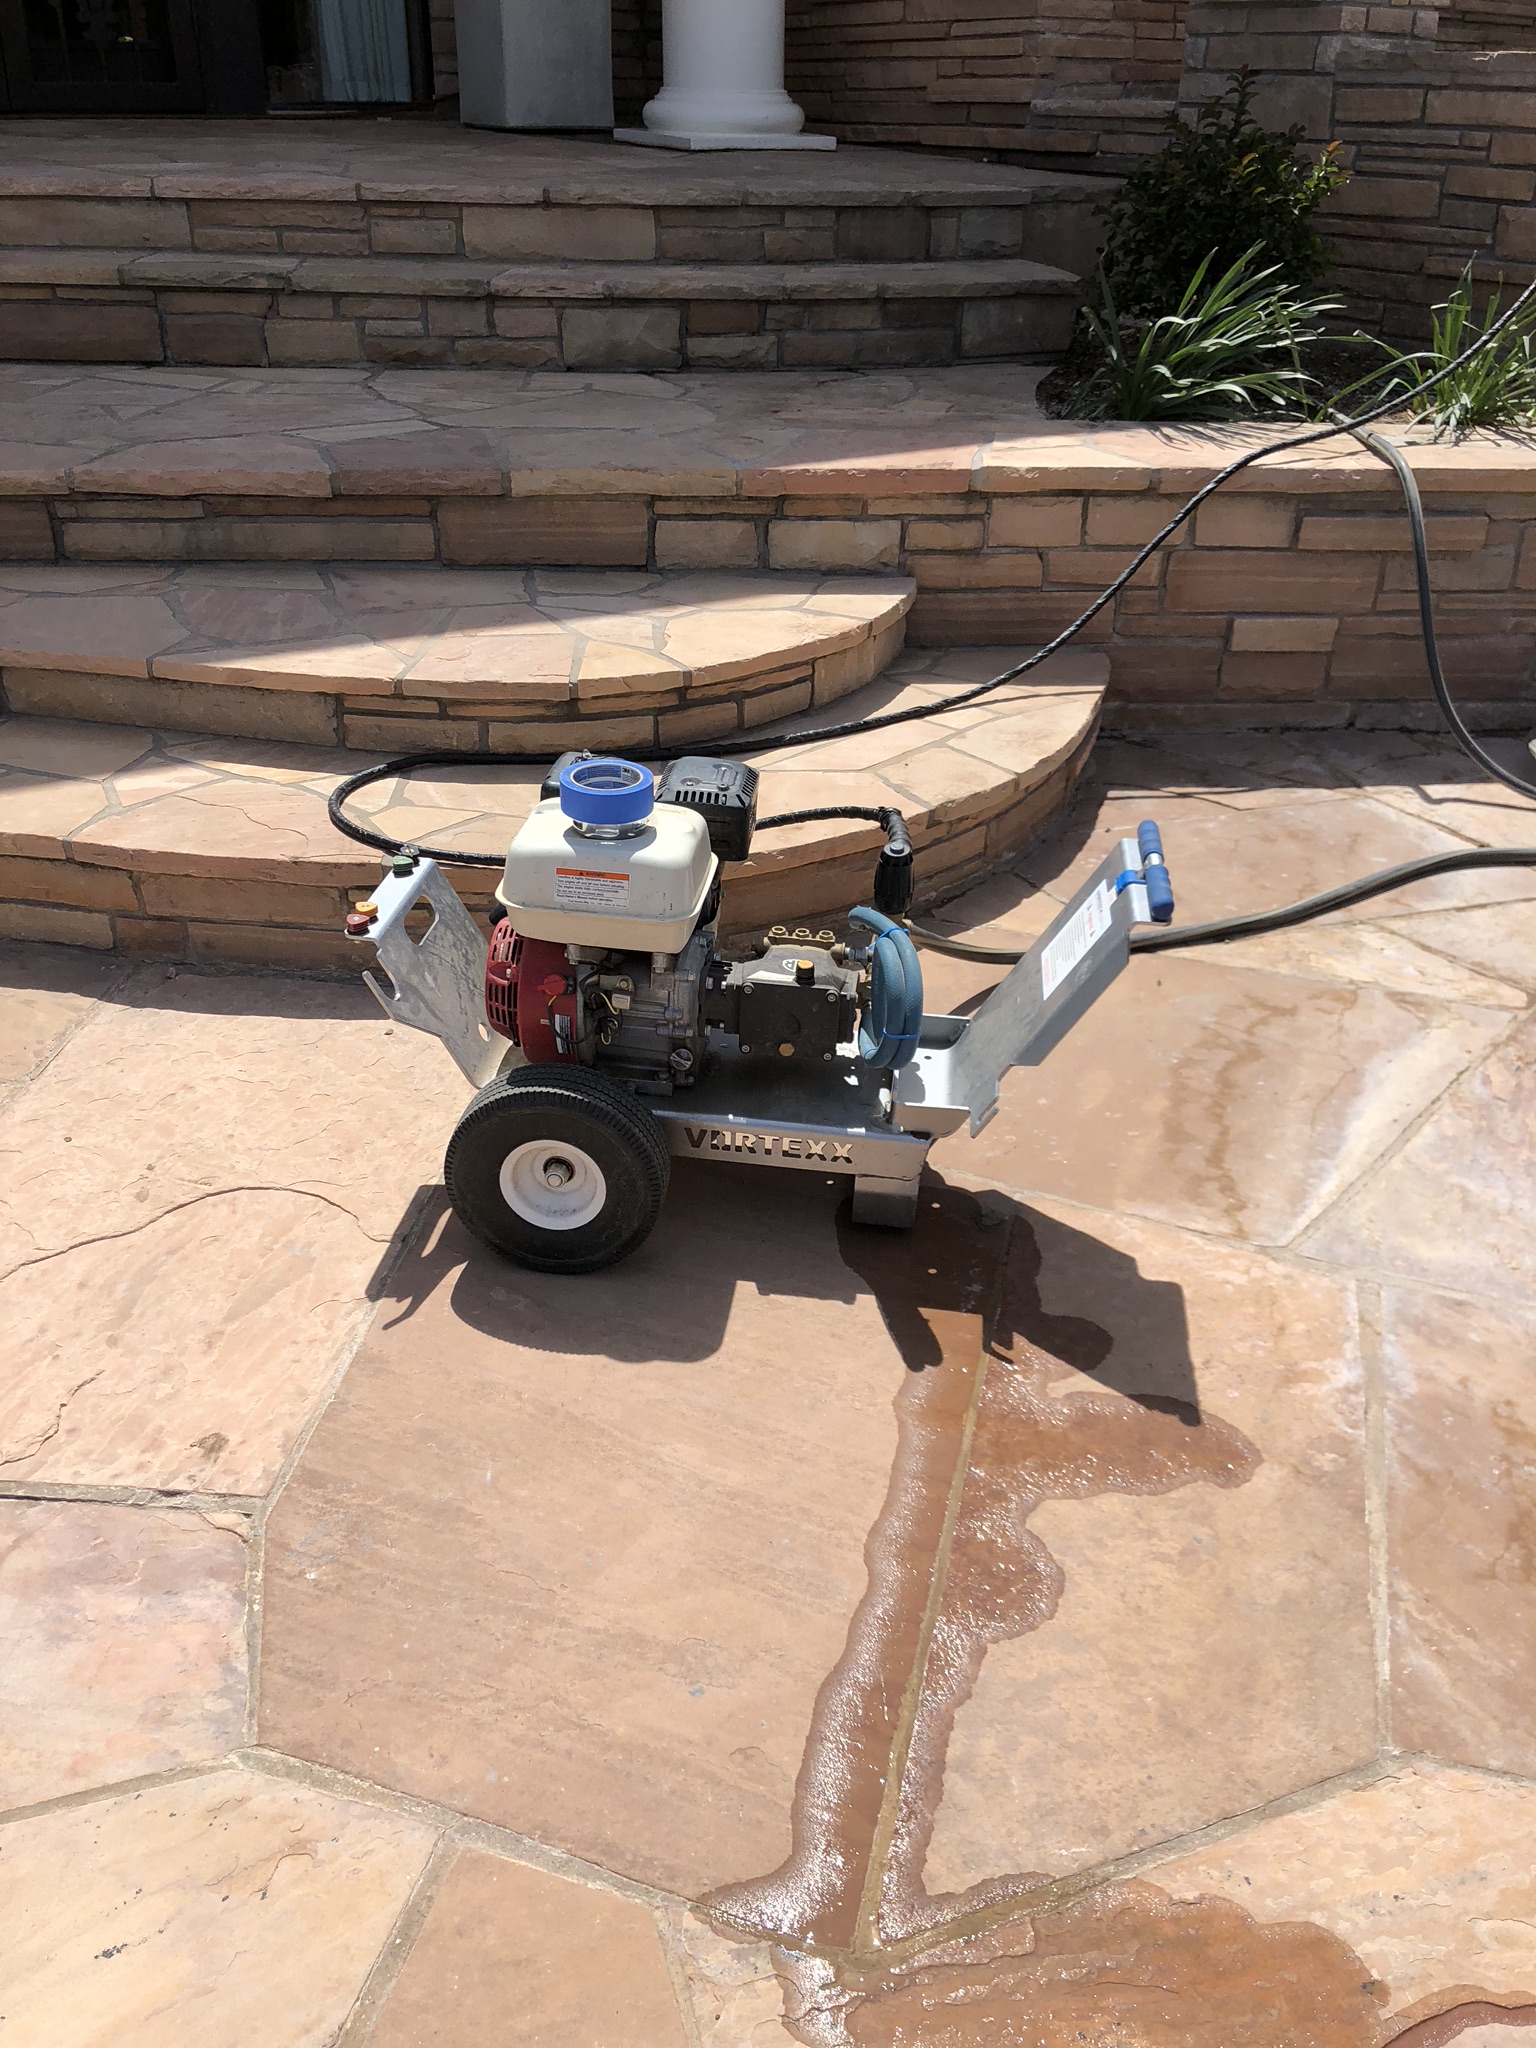 We utilized our pressure sprayer to prepare our flagstone decks prior to installing the Stone Armor product. Pressure washing your deck is a very important step in the installation process. It removes small dust, debris and miscellaneous particles from your deck. This provides a much better bond between the stone and the Stone Armor once applied.